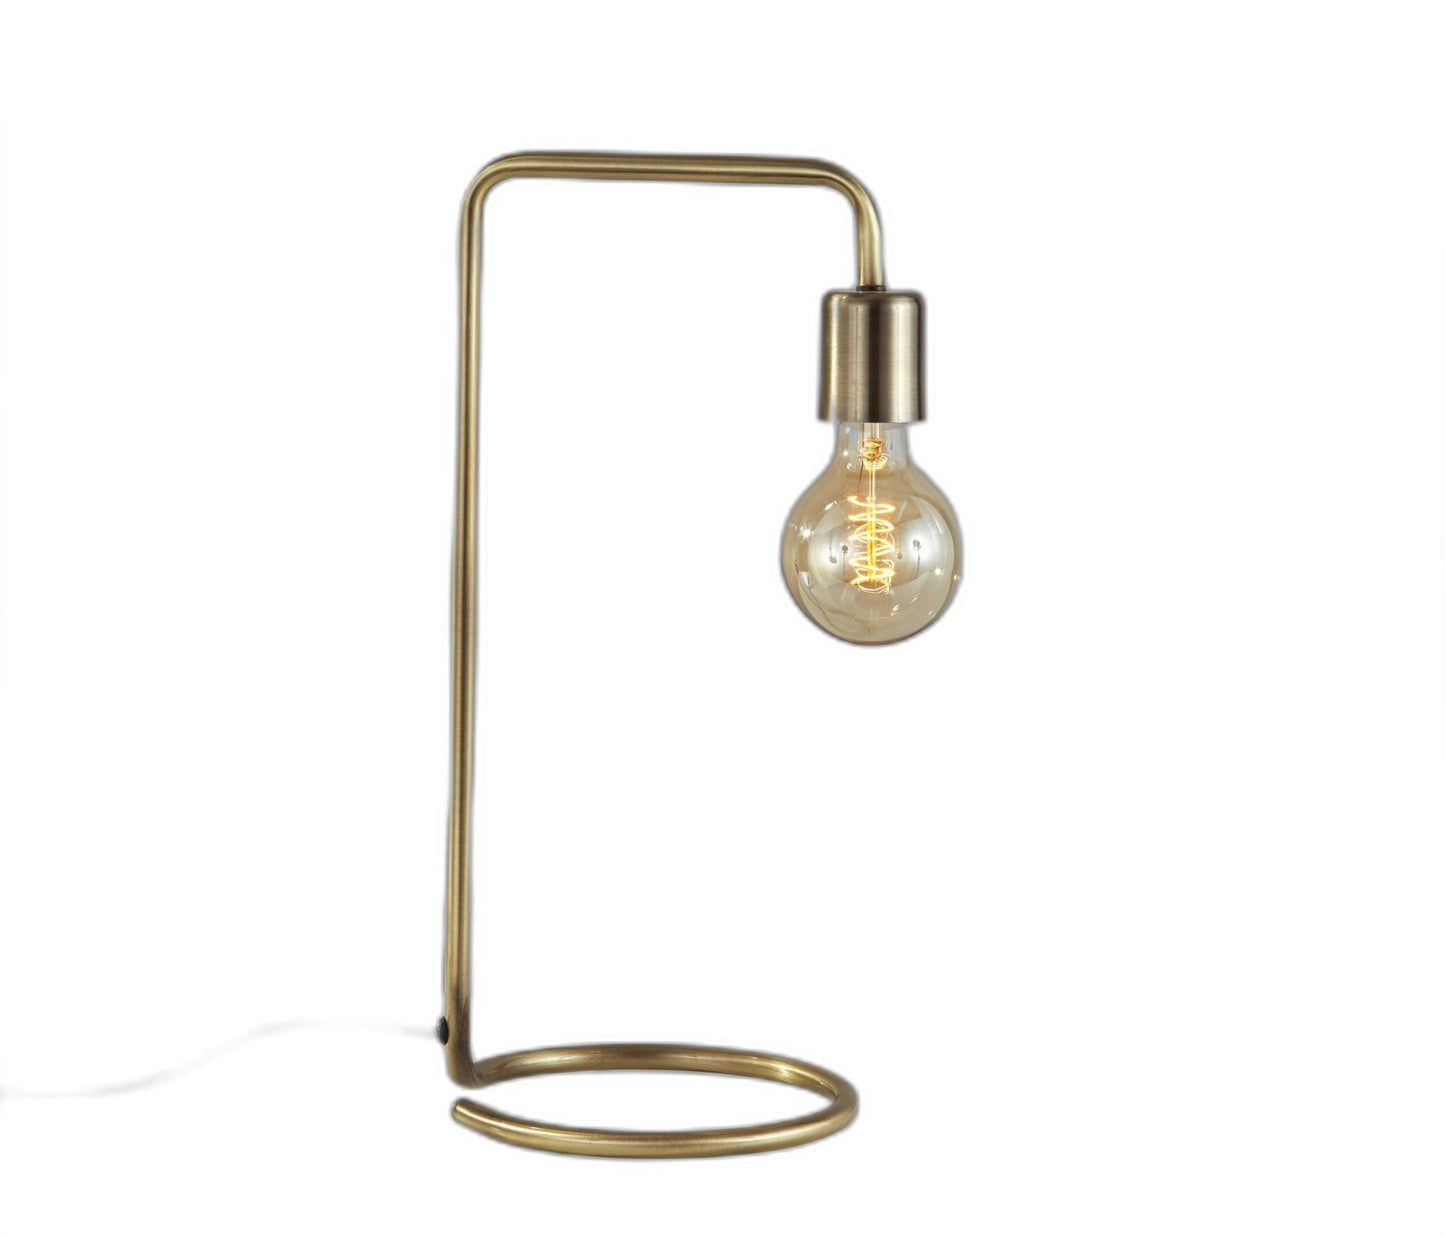 Industrial Antique Brass Finish Metal Desk Lamp With Vintage Edison Bulb By Homeroots